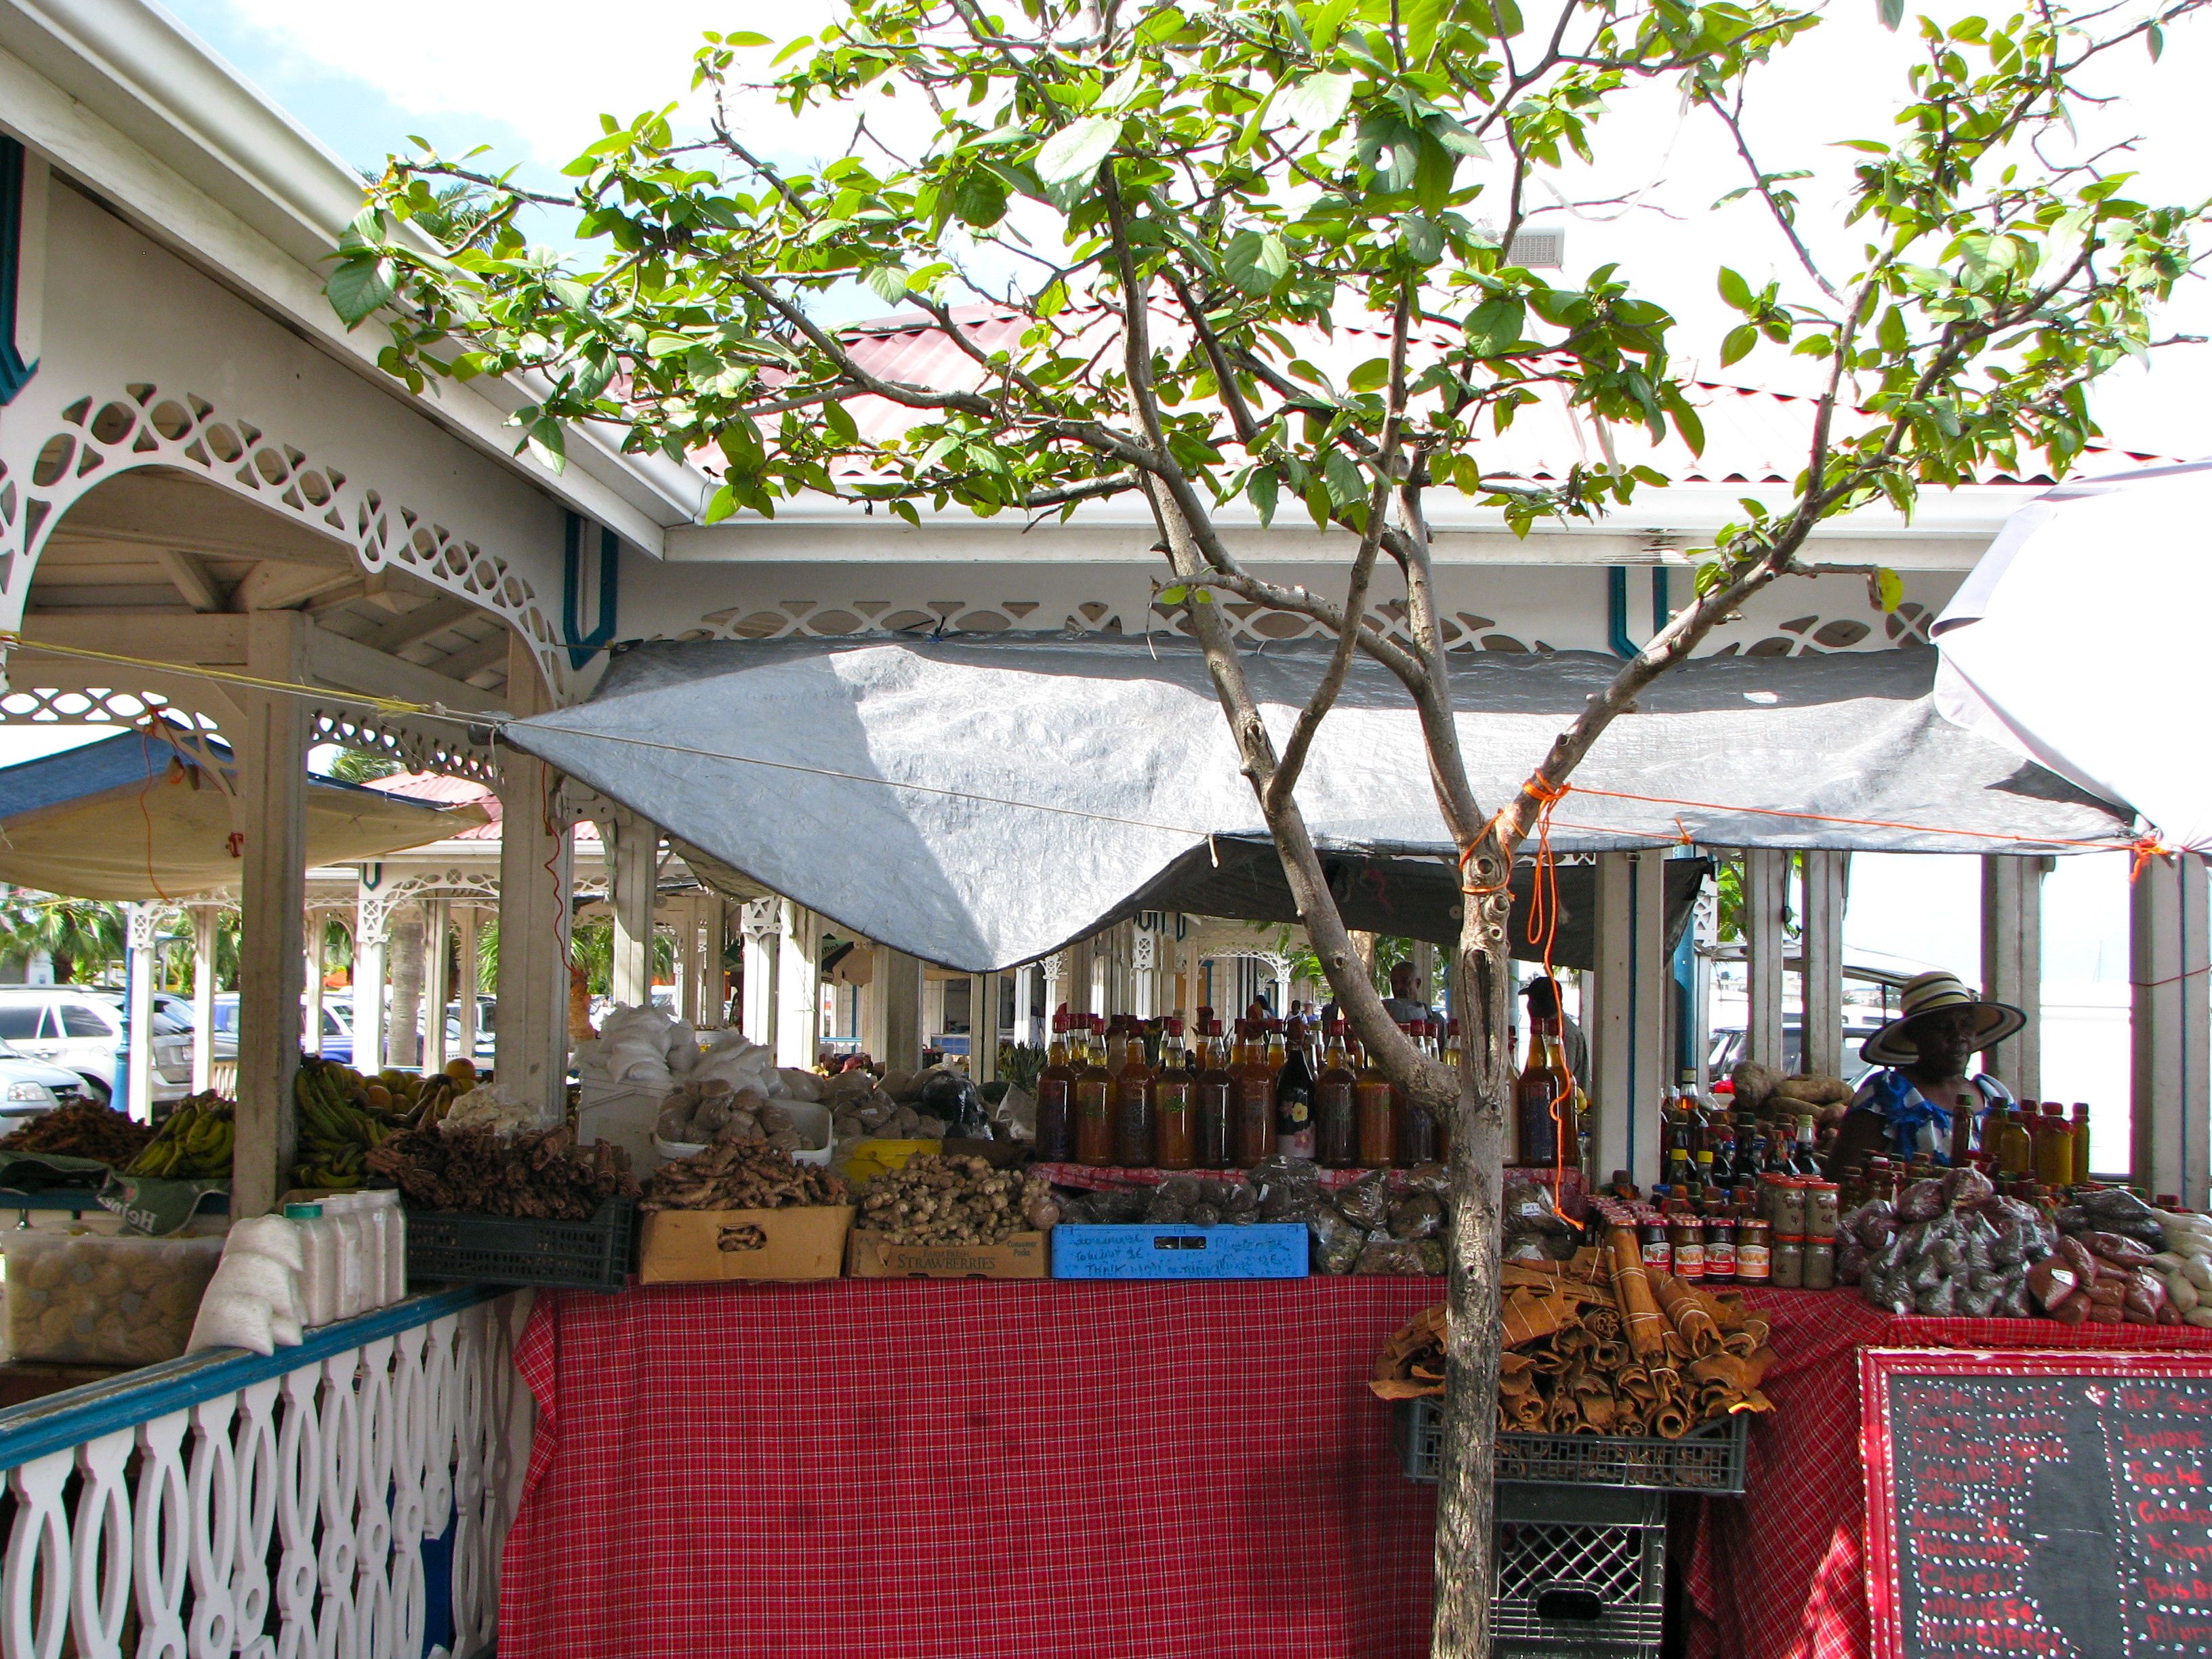 A booth at the market in Marigot, St. Martin. My own photo.